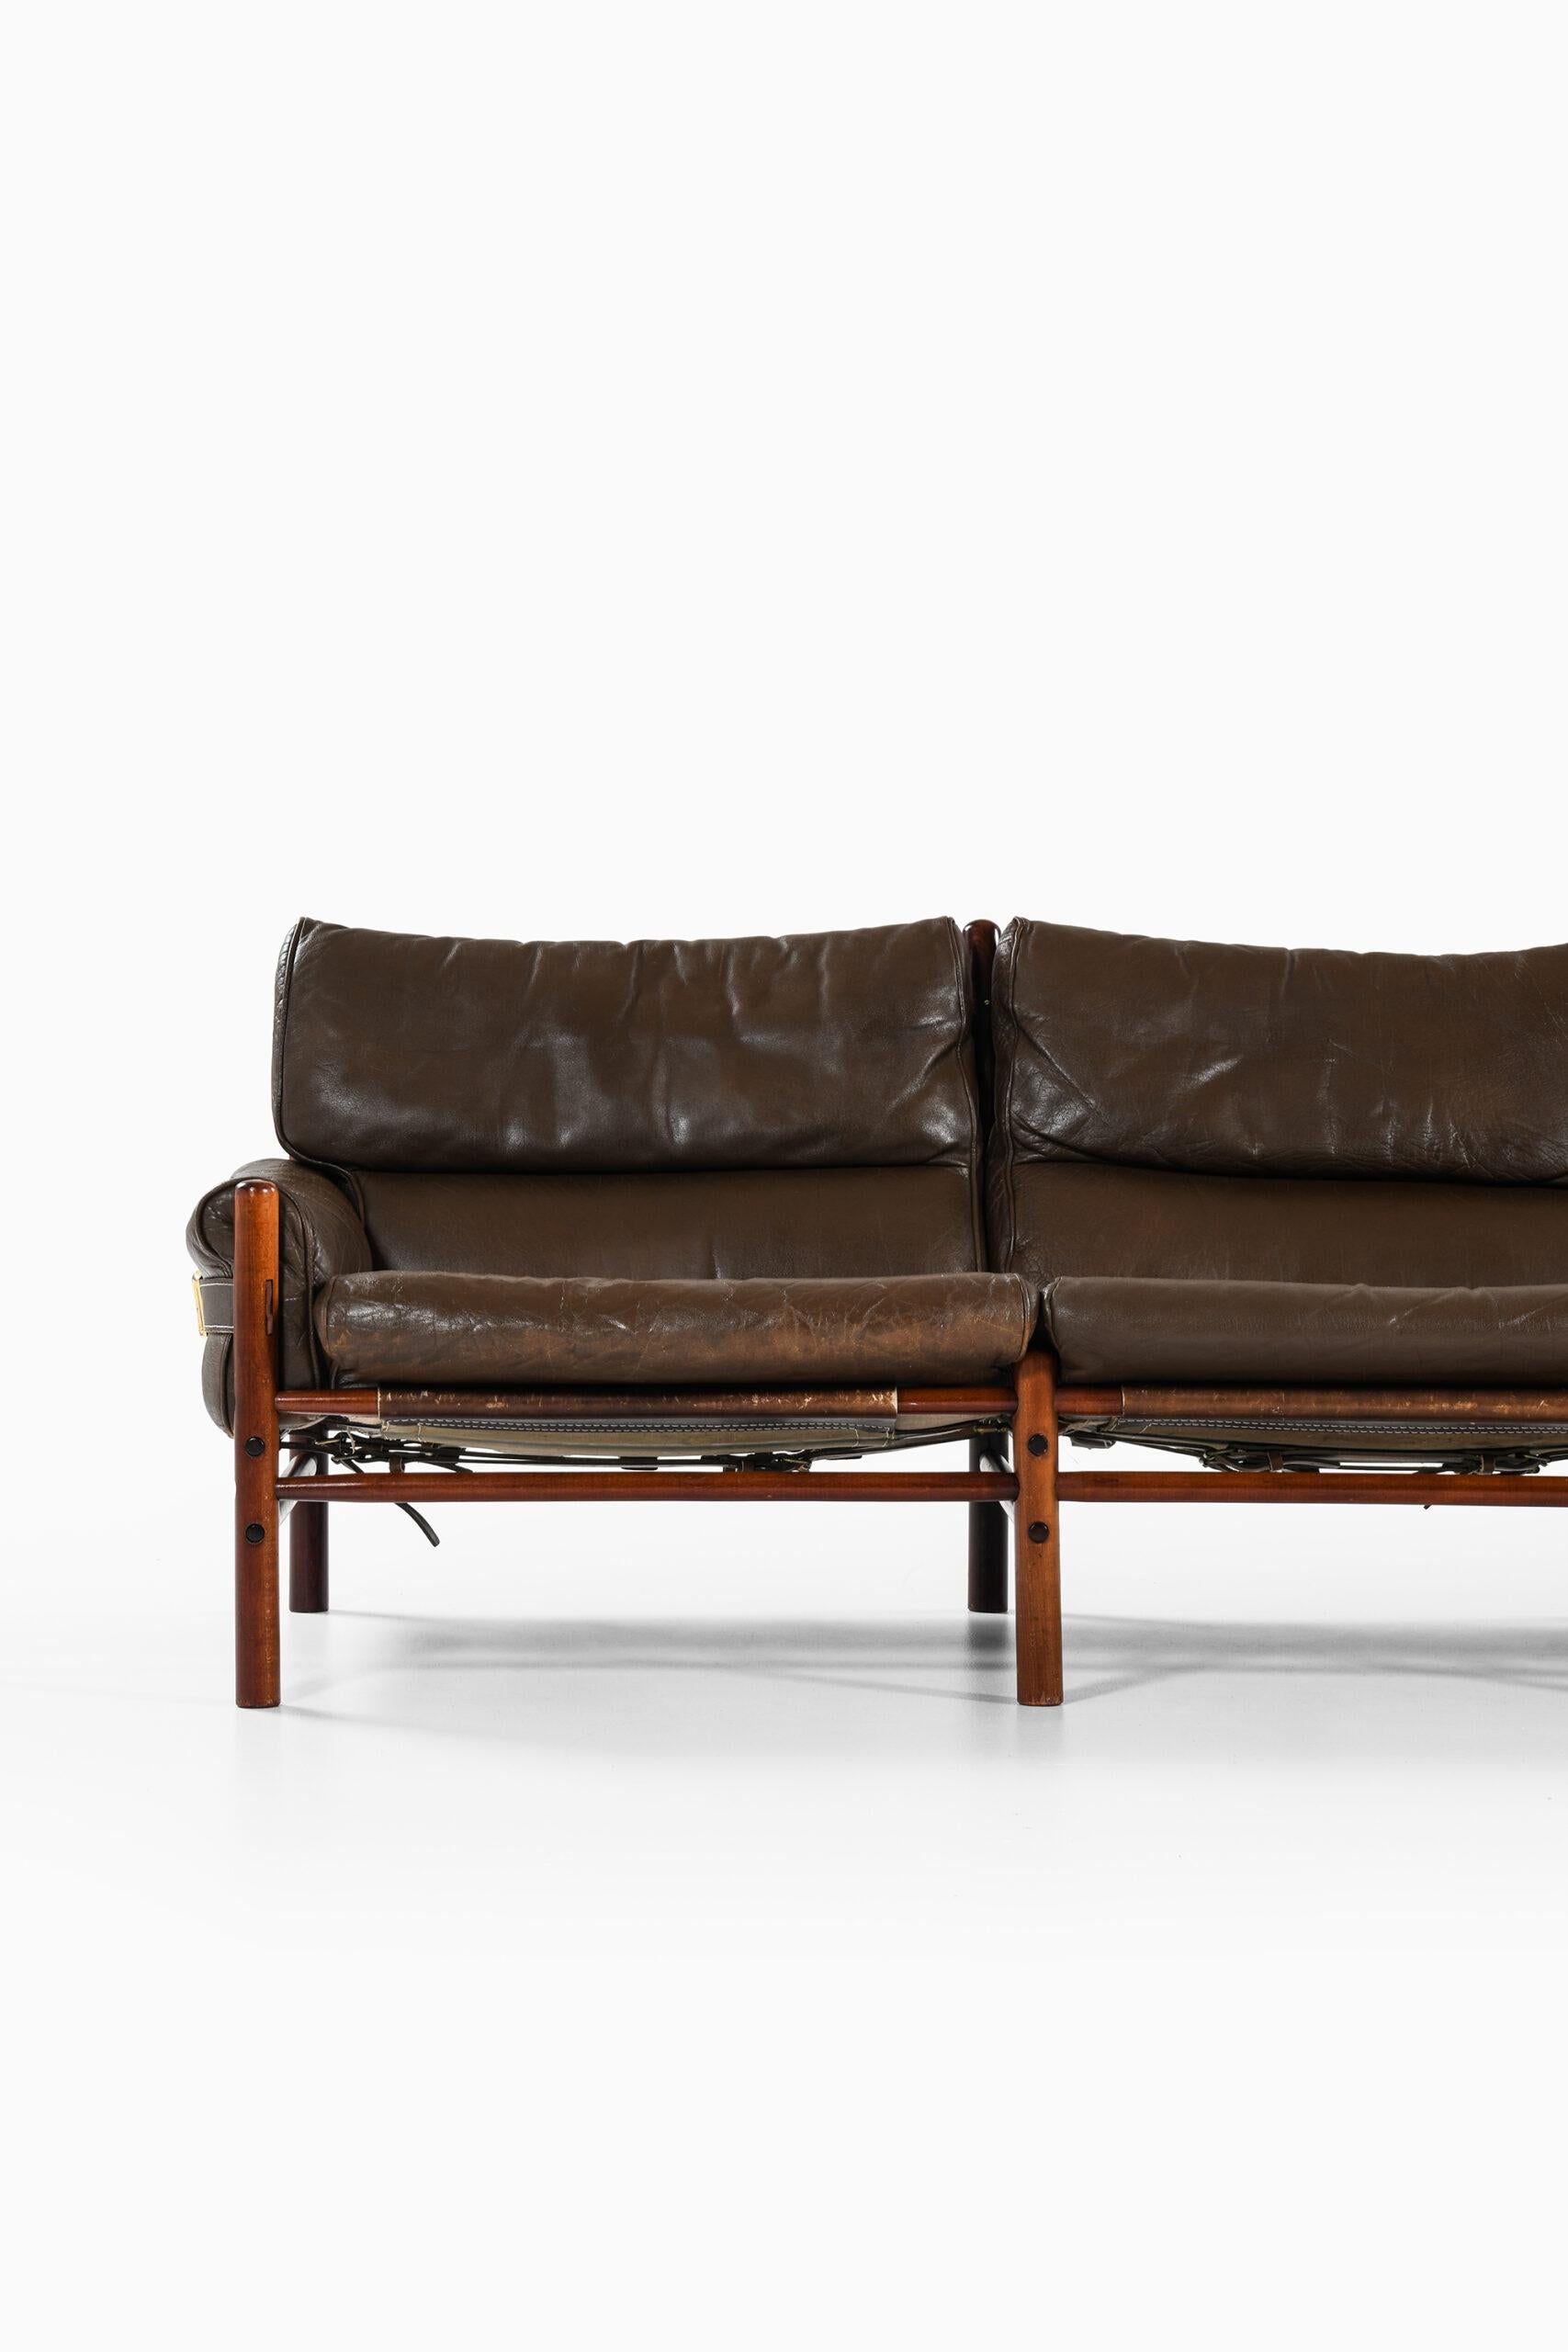 3-seater sofa model Kontiki designed by Arne Norell. Produced by Arne Norell AB in Aneby, Sweden.
 